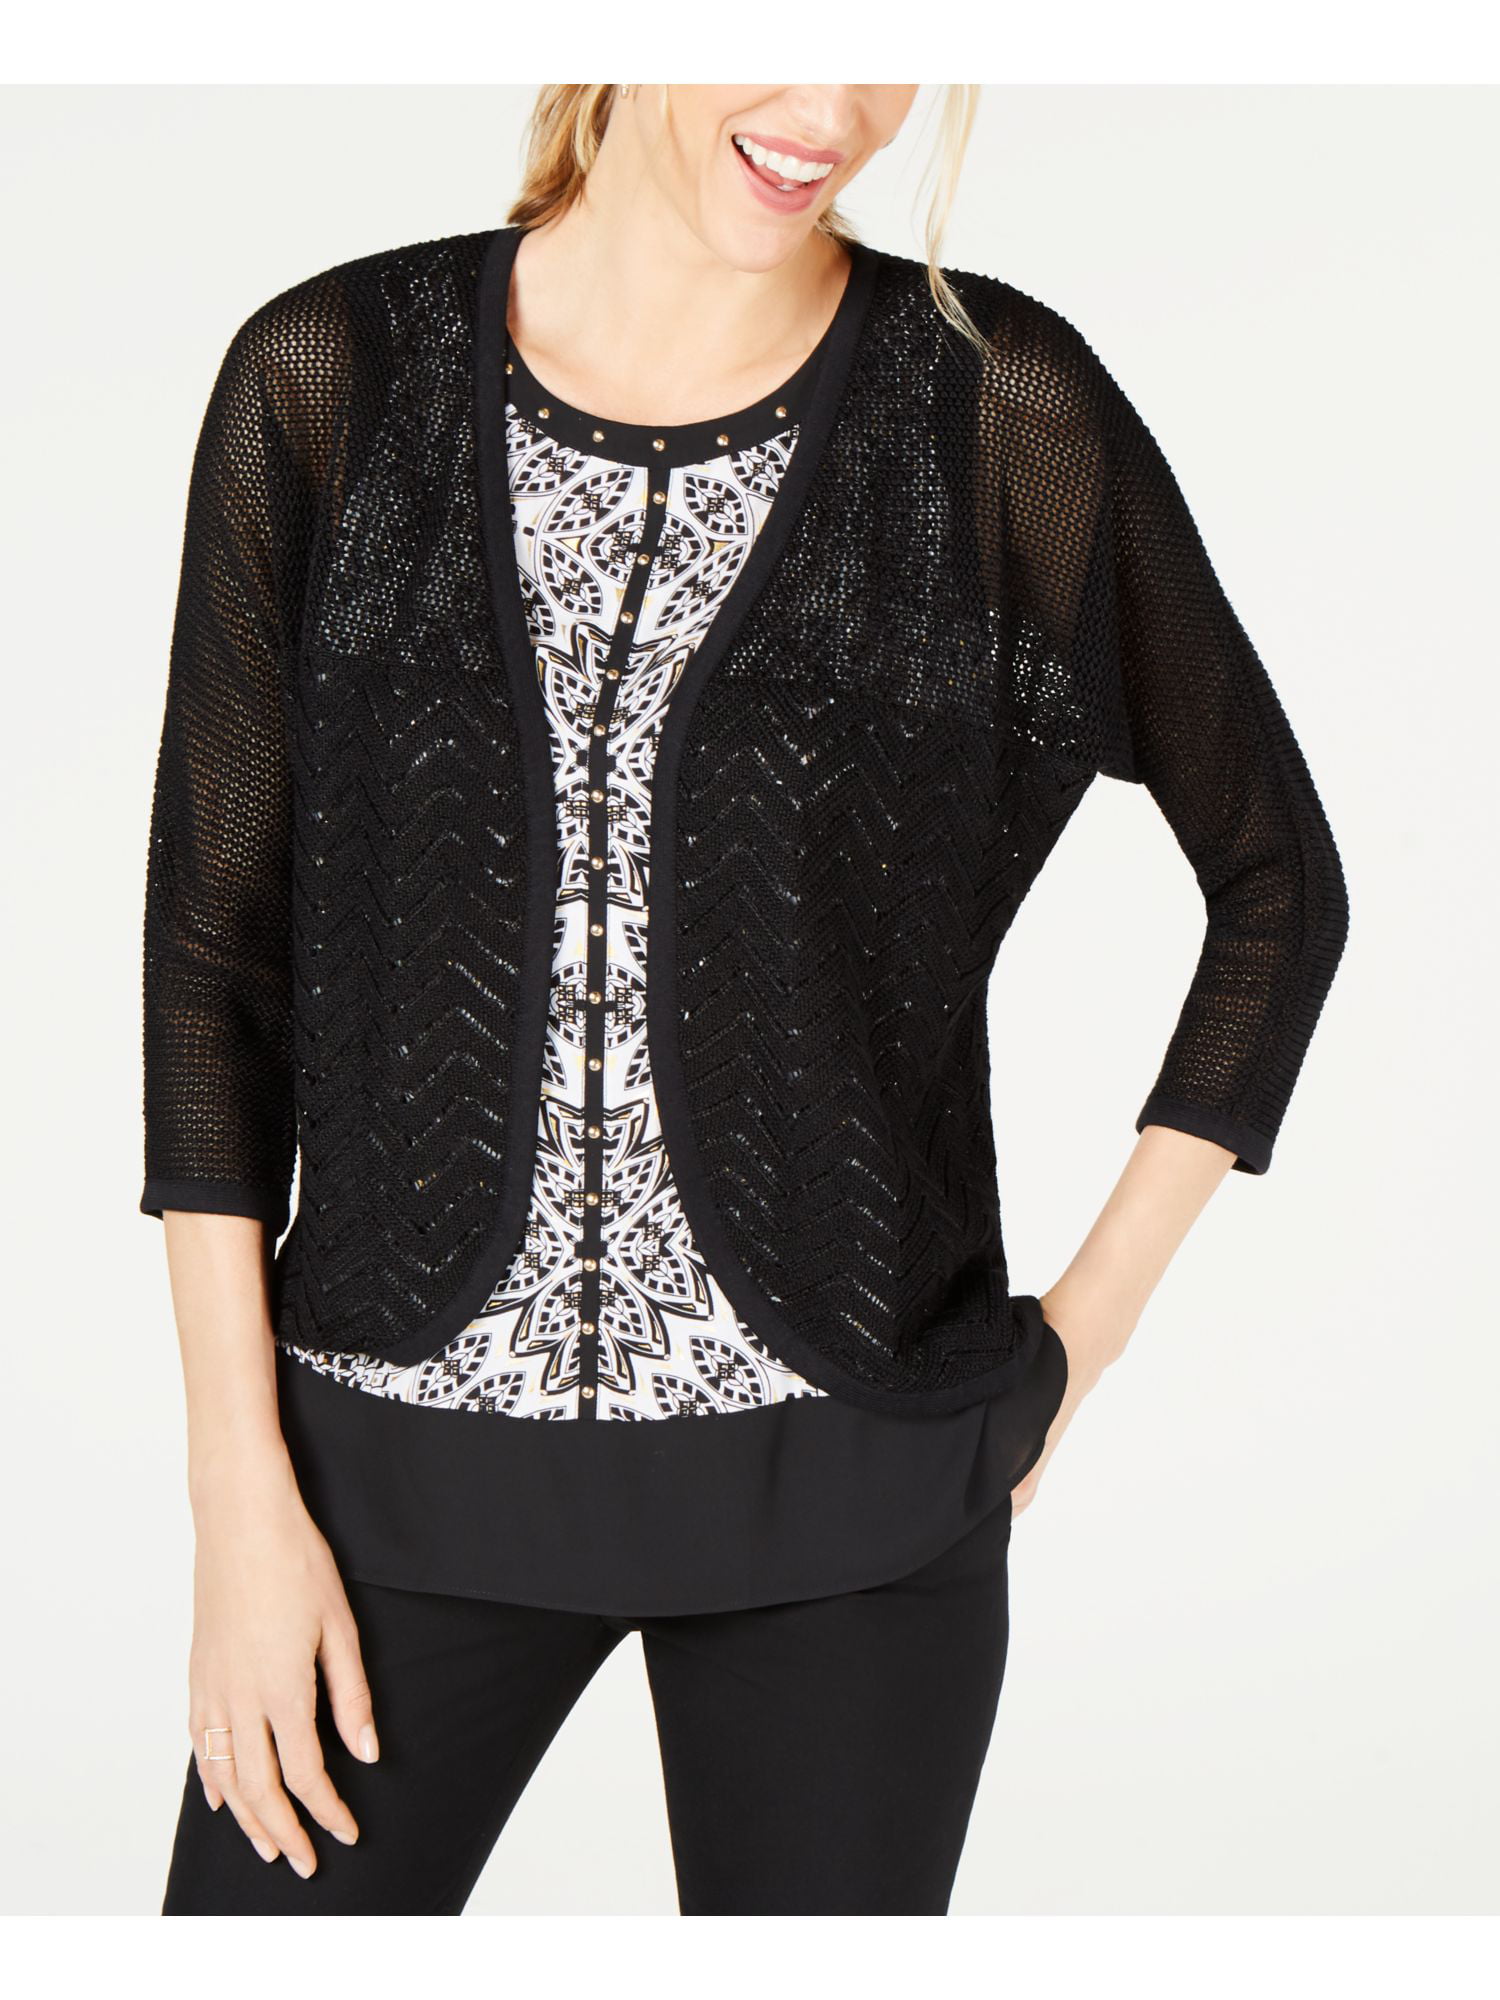 JM Collection - JM COLLECTION Womens Black 3/4 Sleeve Open Cardigan